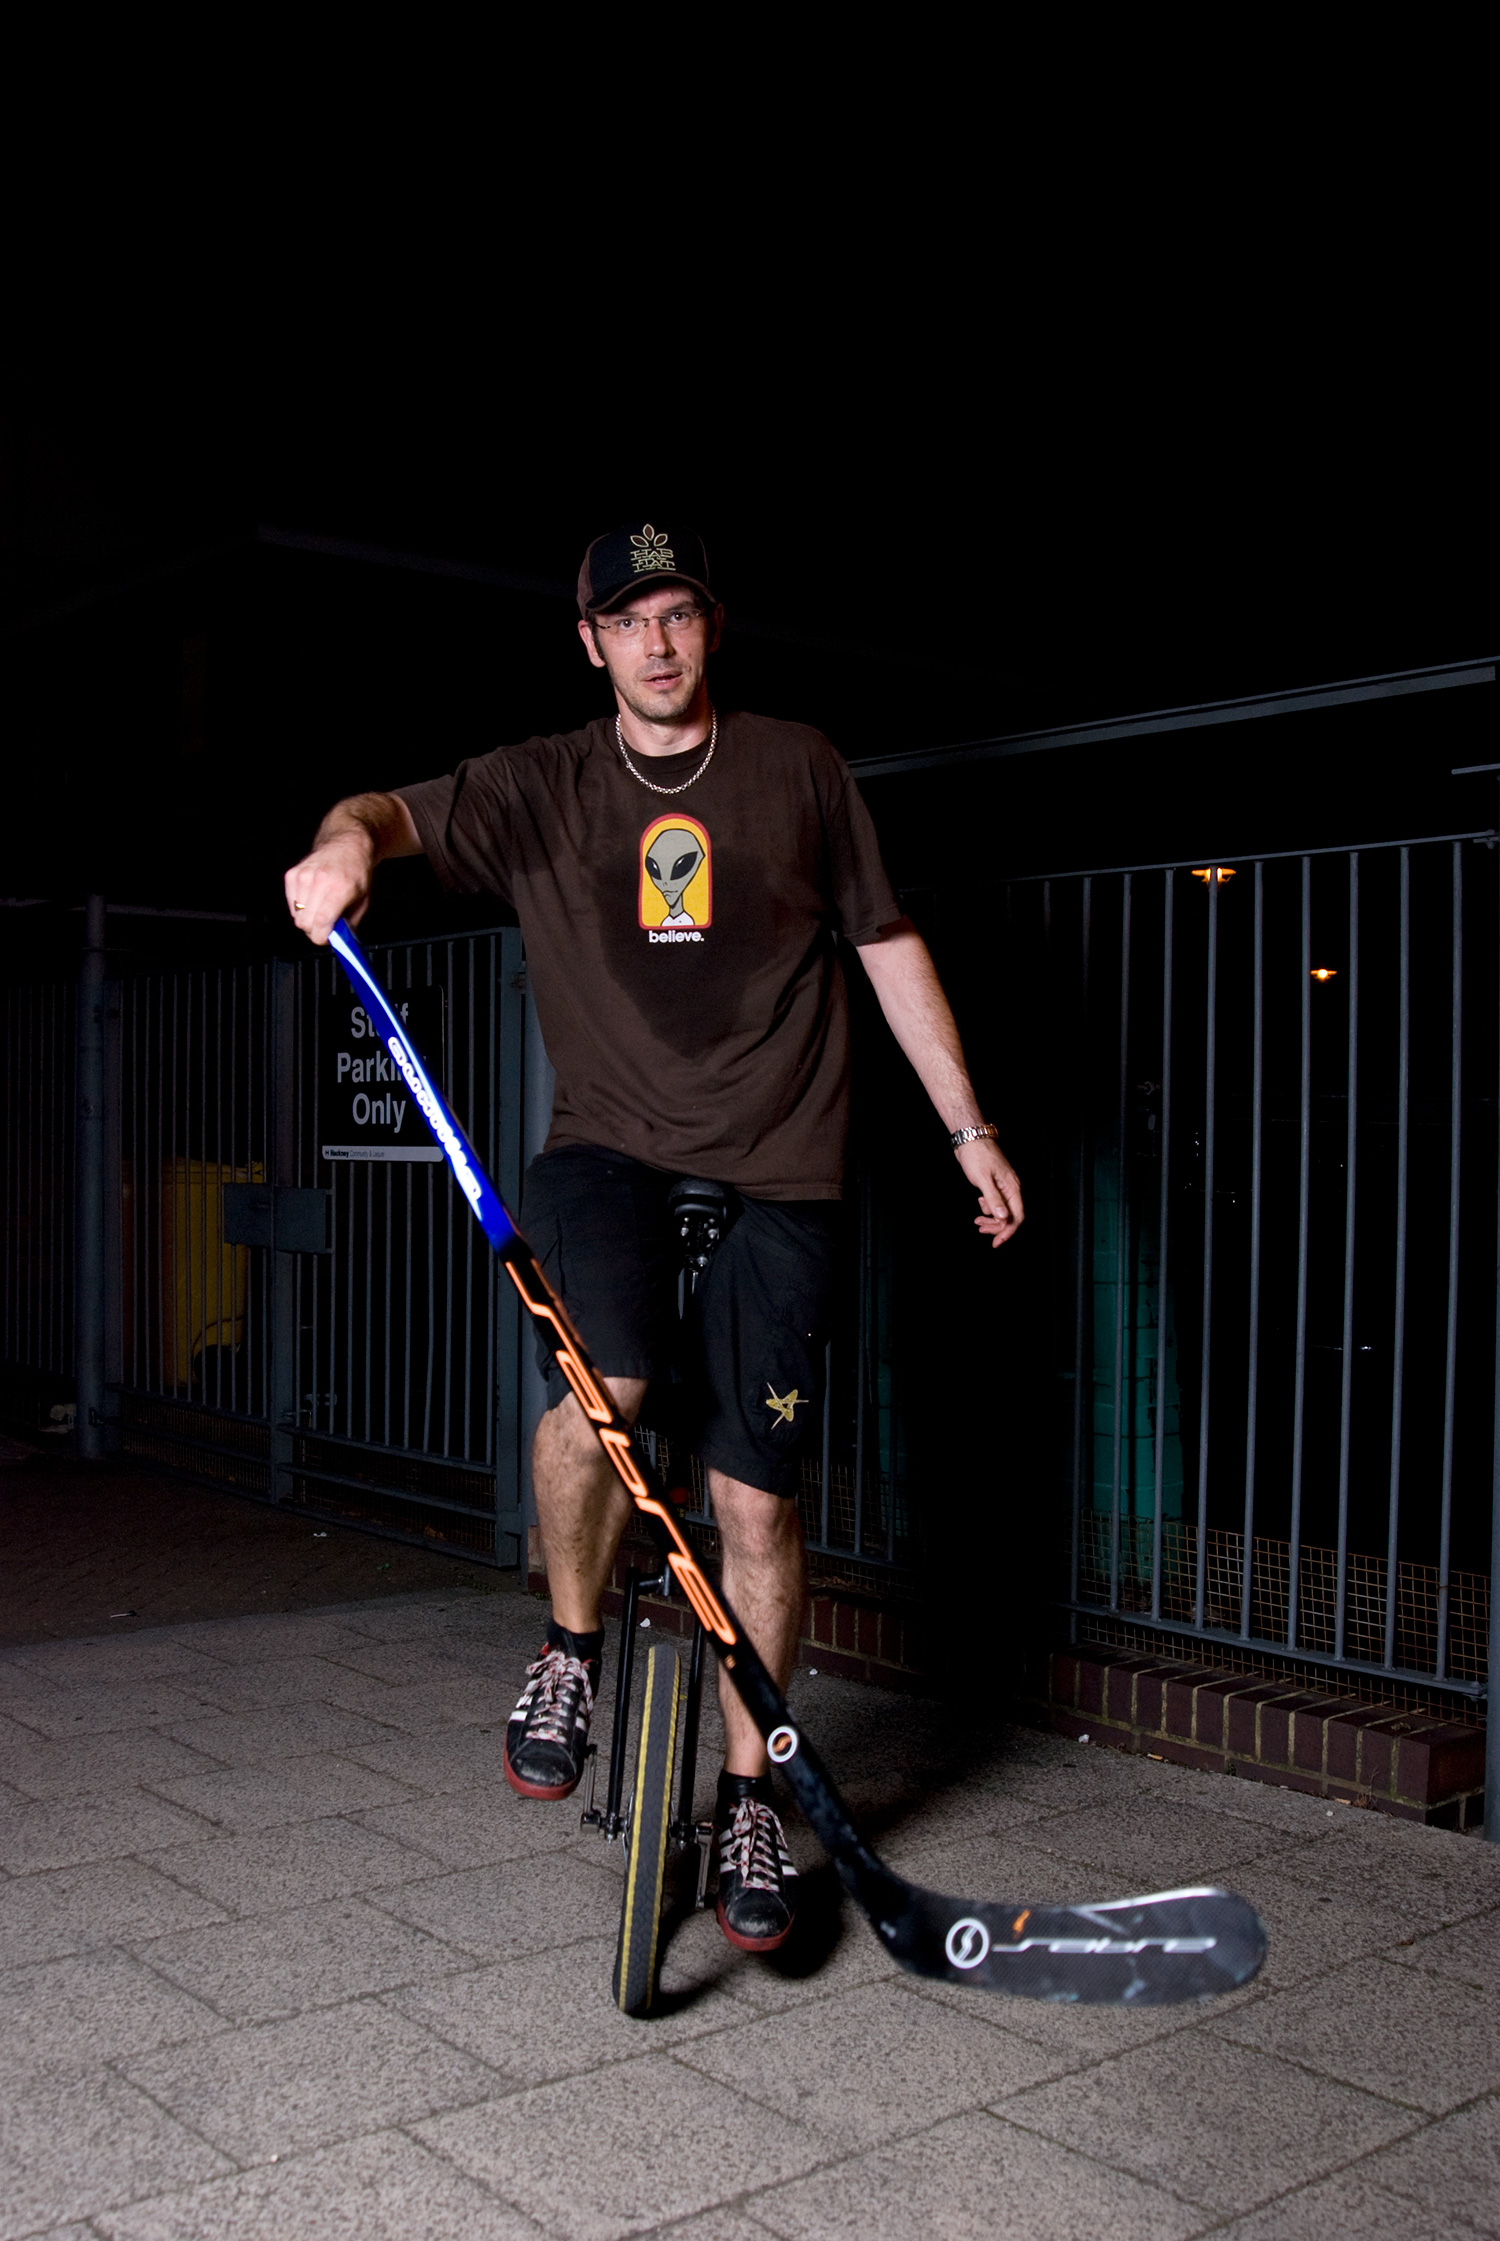  Unicycle Hockey Players of Hackney for the Economist's  More Intelligent Life  